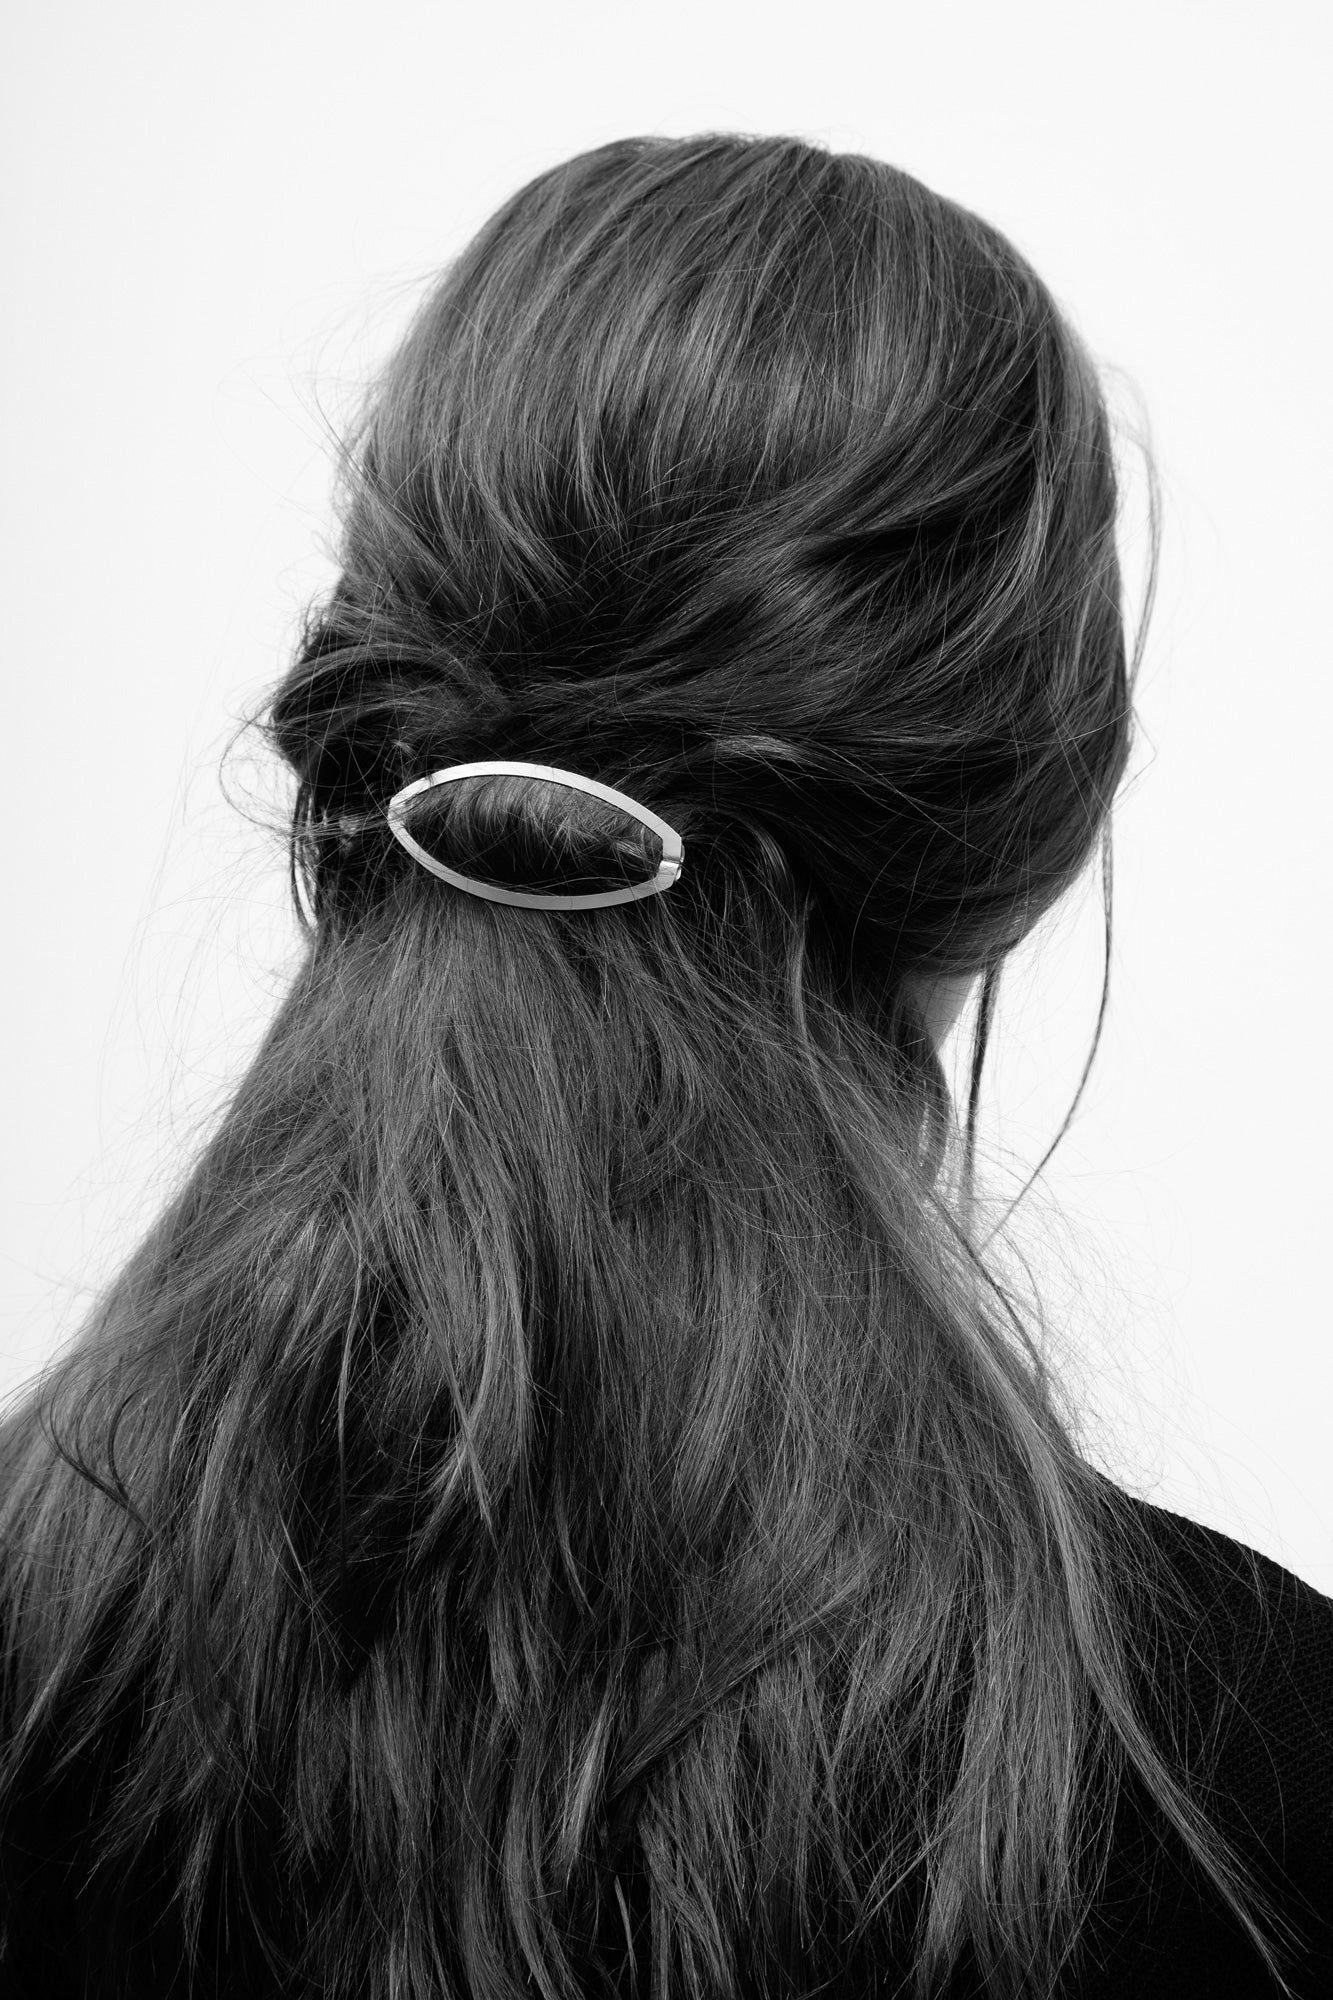 Designer hair clip ALVA secures half updo. Made from high quality materials designed to last